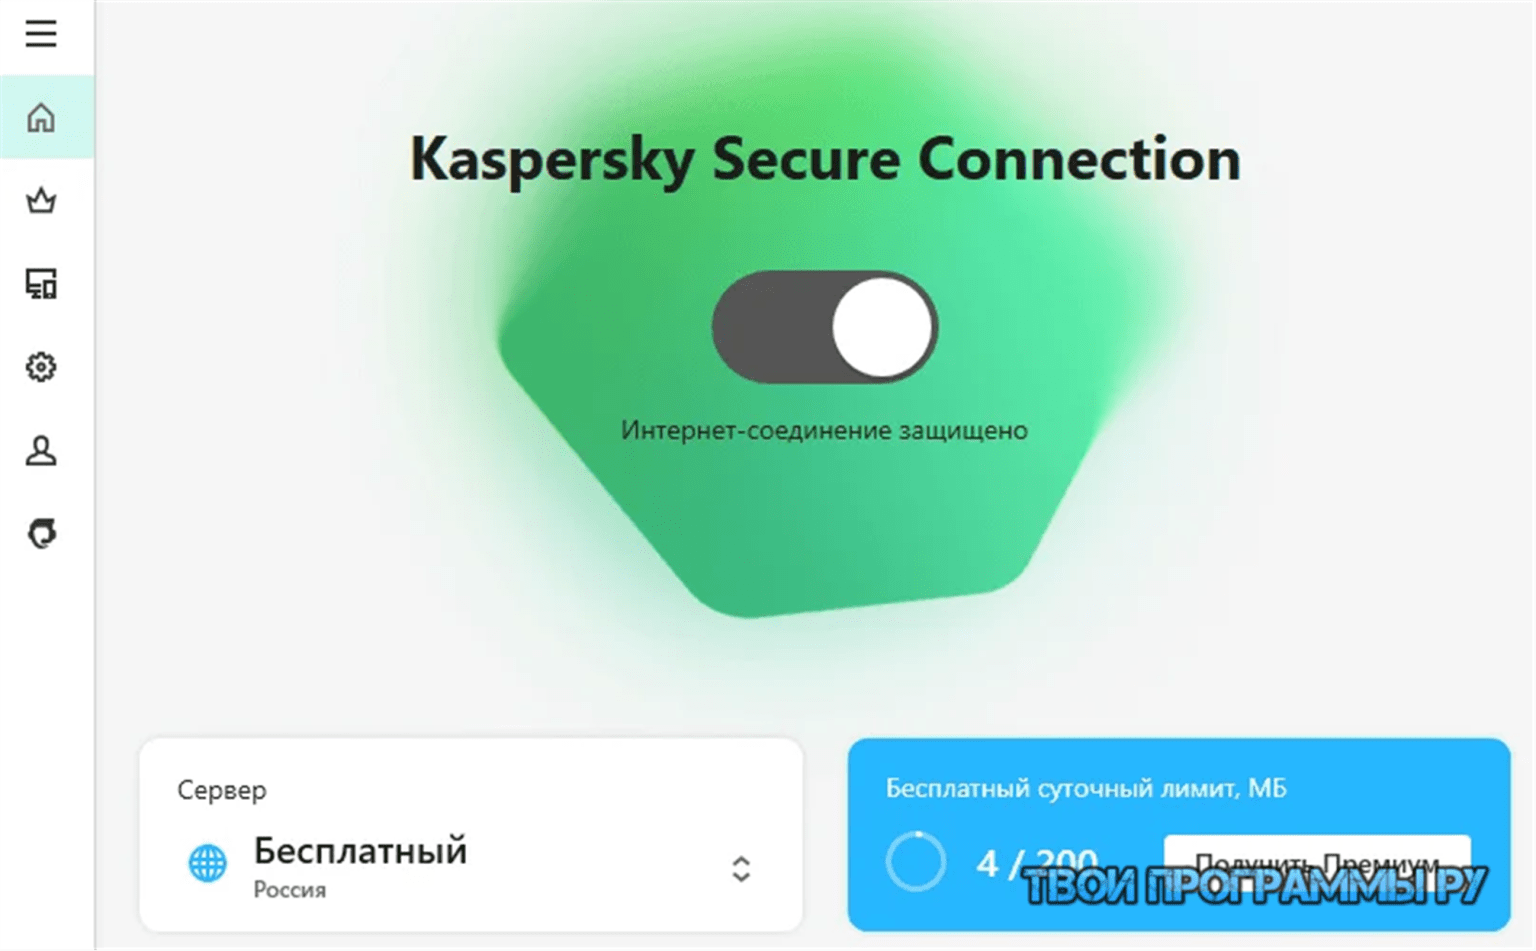 Vpn secure connection. Kaspersky secure connection. Kaspersky secure connection (VPN). Kaspersky secure connection код активации. Secure connection активация.